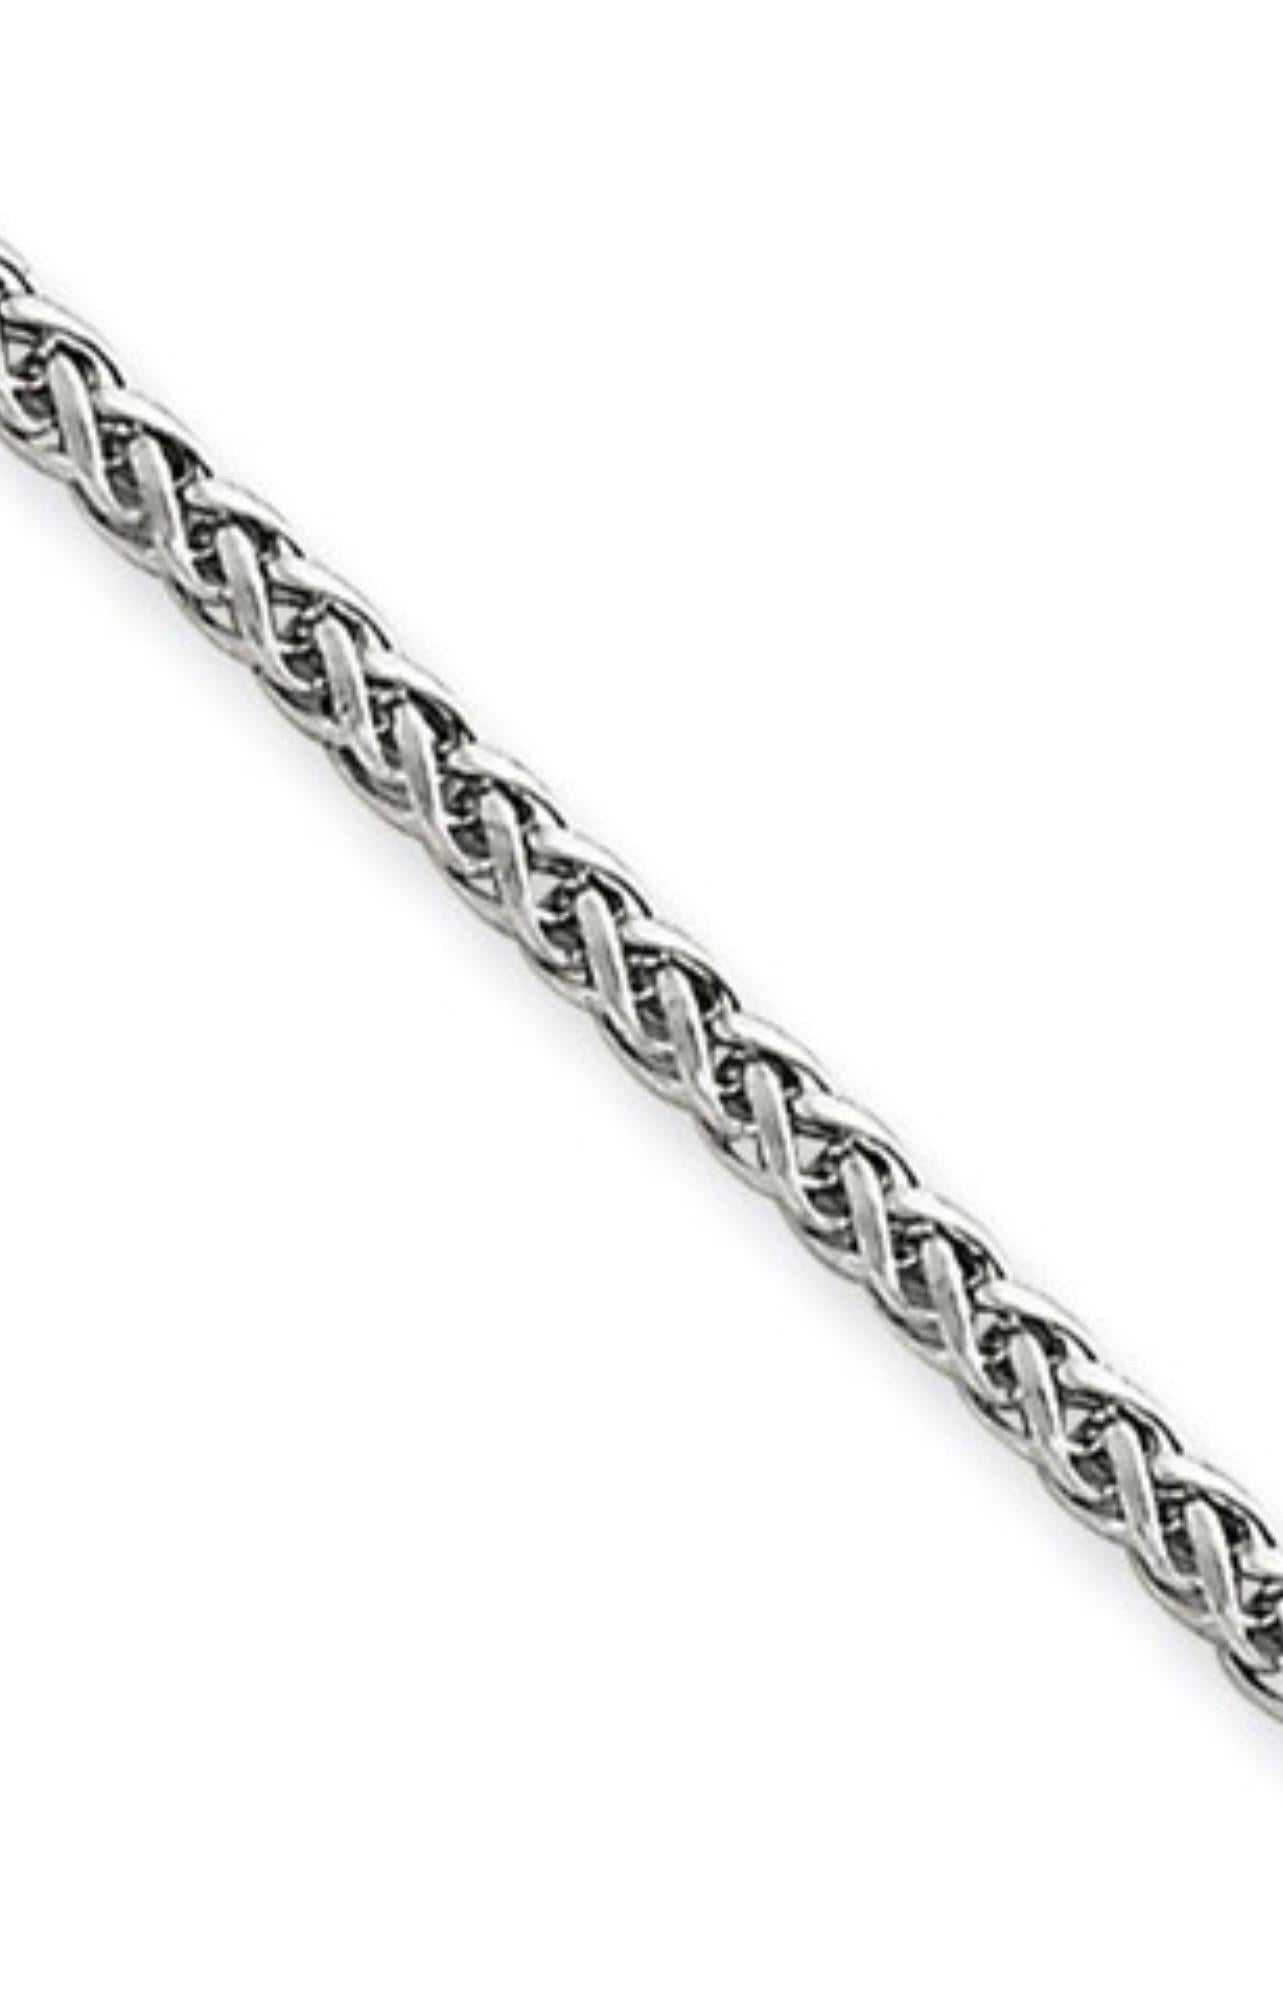 Vintage Unisex 14kt White Gold 18 in Hollow Wheat Chain 4.0mm, Italian , 11 Gm
18  Inches long Necklace
Lobster Clasp
Weight of the Necklace is 11 Grams 

Please look at all the pictures
Its very hard to capture the true color and luster of the